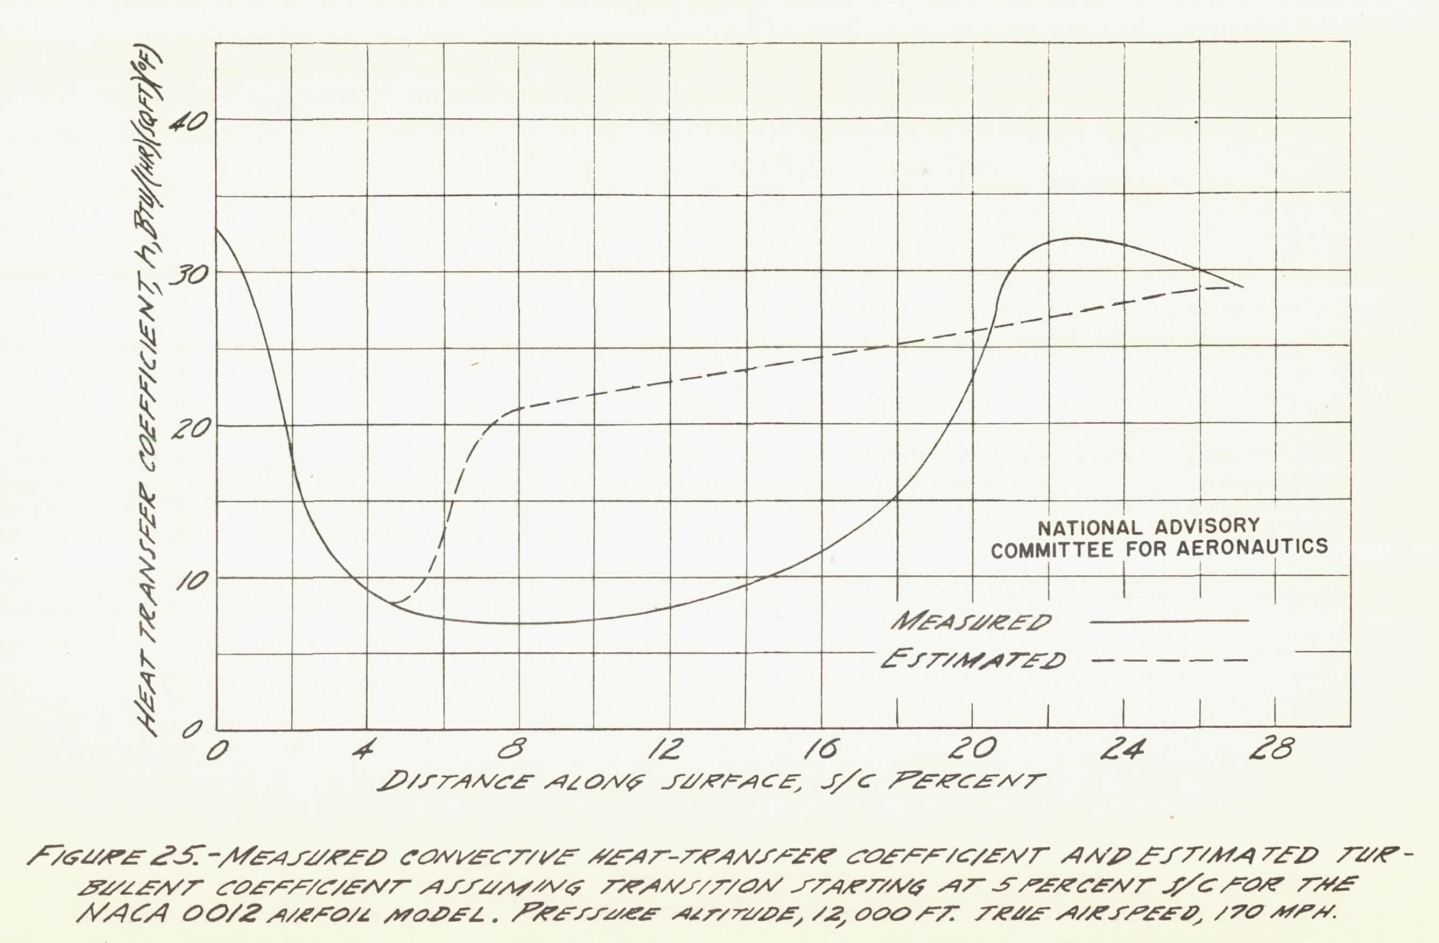 Figure 25. Measured convective heat-transfer coefficient and estimated turbulent coefficient assumng transition starting at 5 percent S/C for the NACA 0012 airfoil model. 
Pressure altitude, 12000 ft. True airspeed, 170 mph.